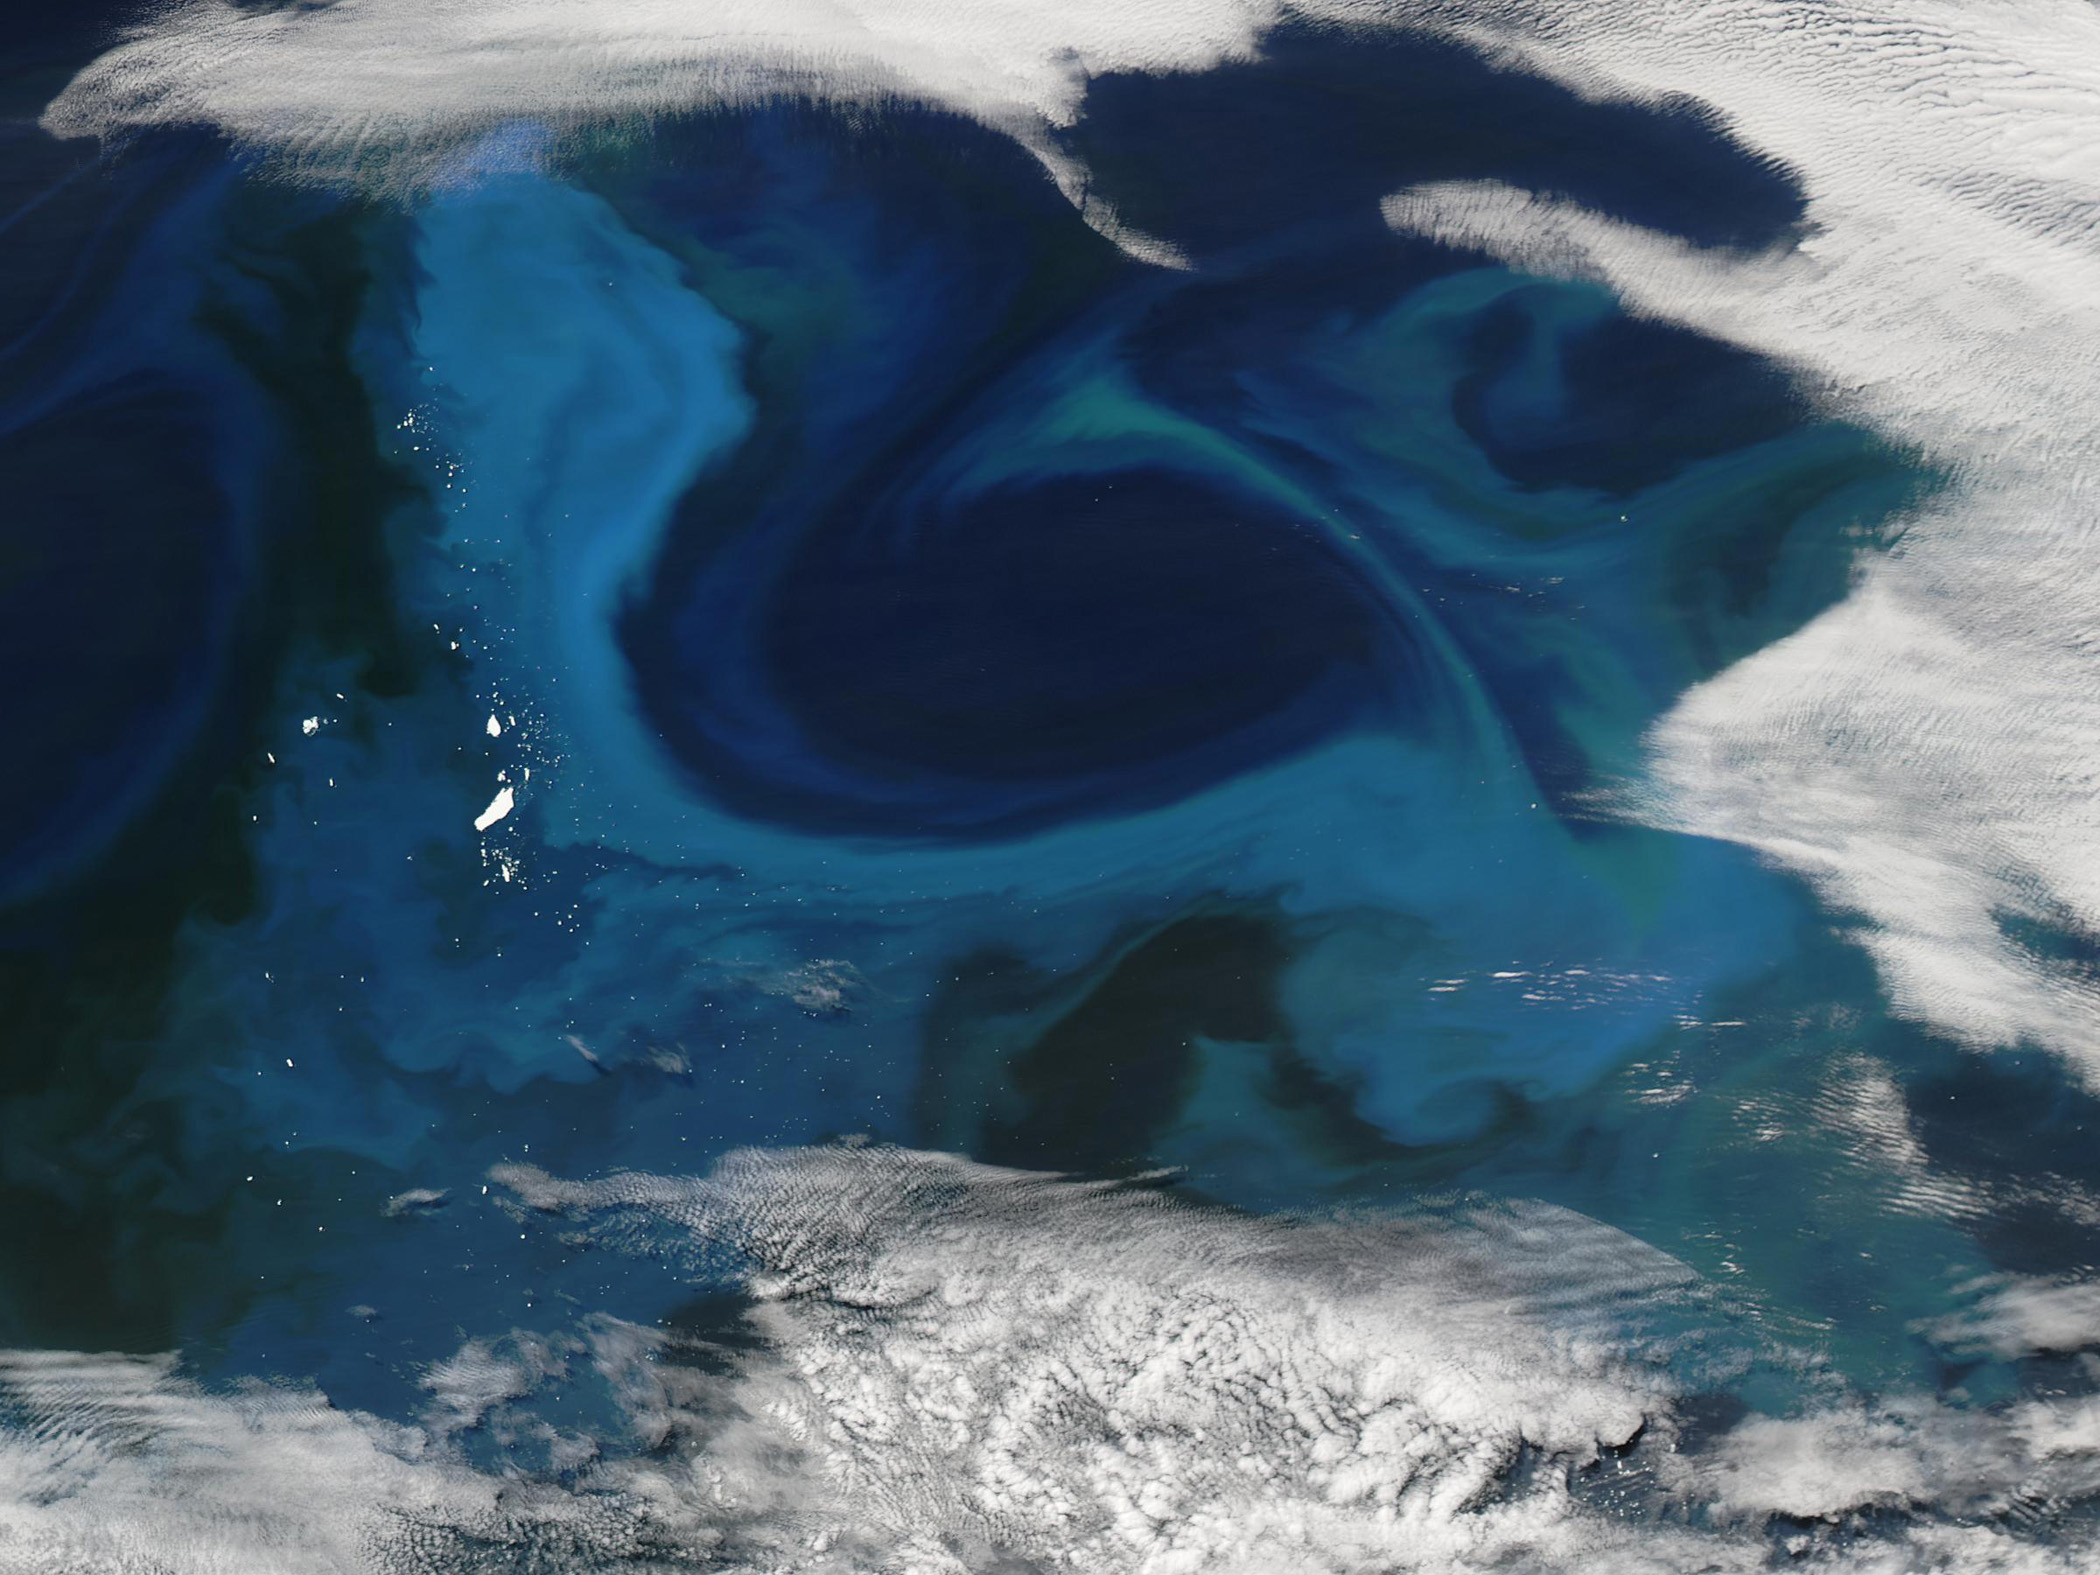 A phytoplankton bloom in the Southern Ocean, captured during a break in the clouds by an orbiting NASA satellite. (The region pictured is different from that where the SOFeX experiment was conducted.) 